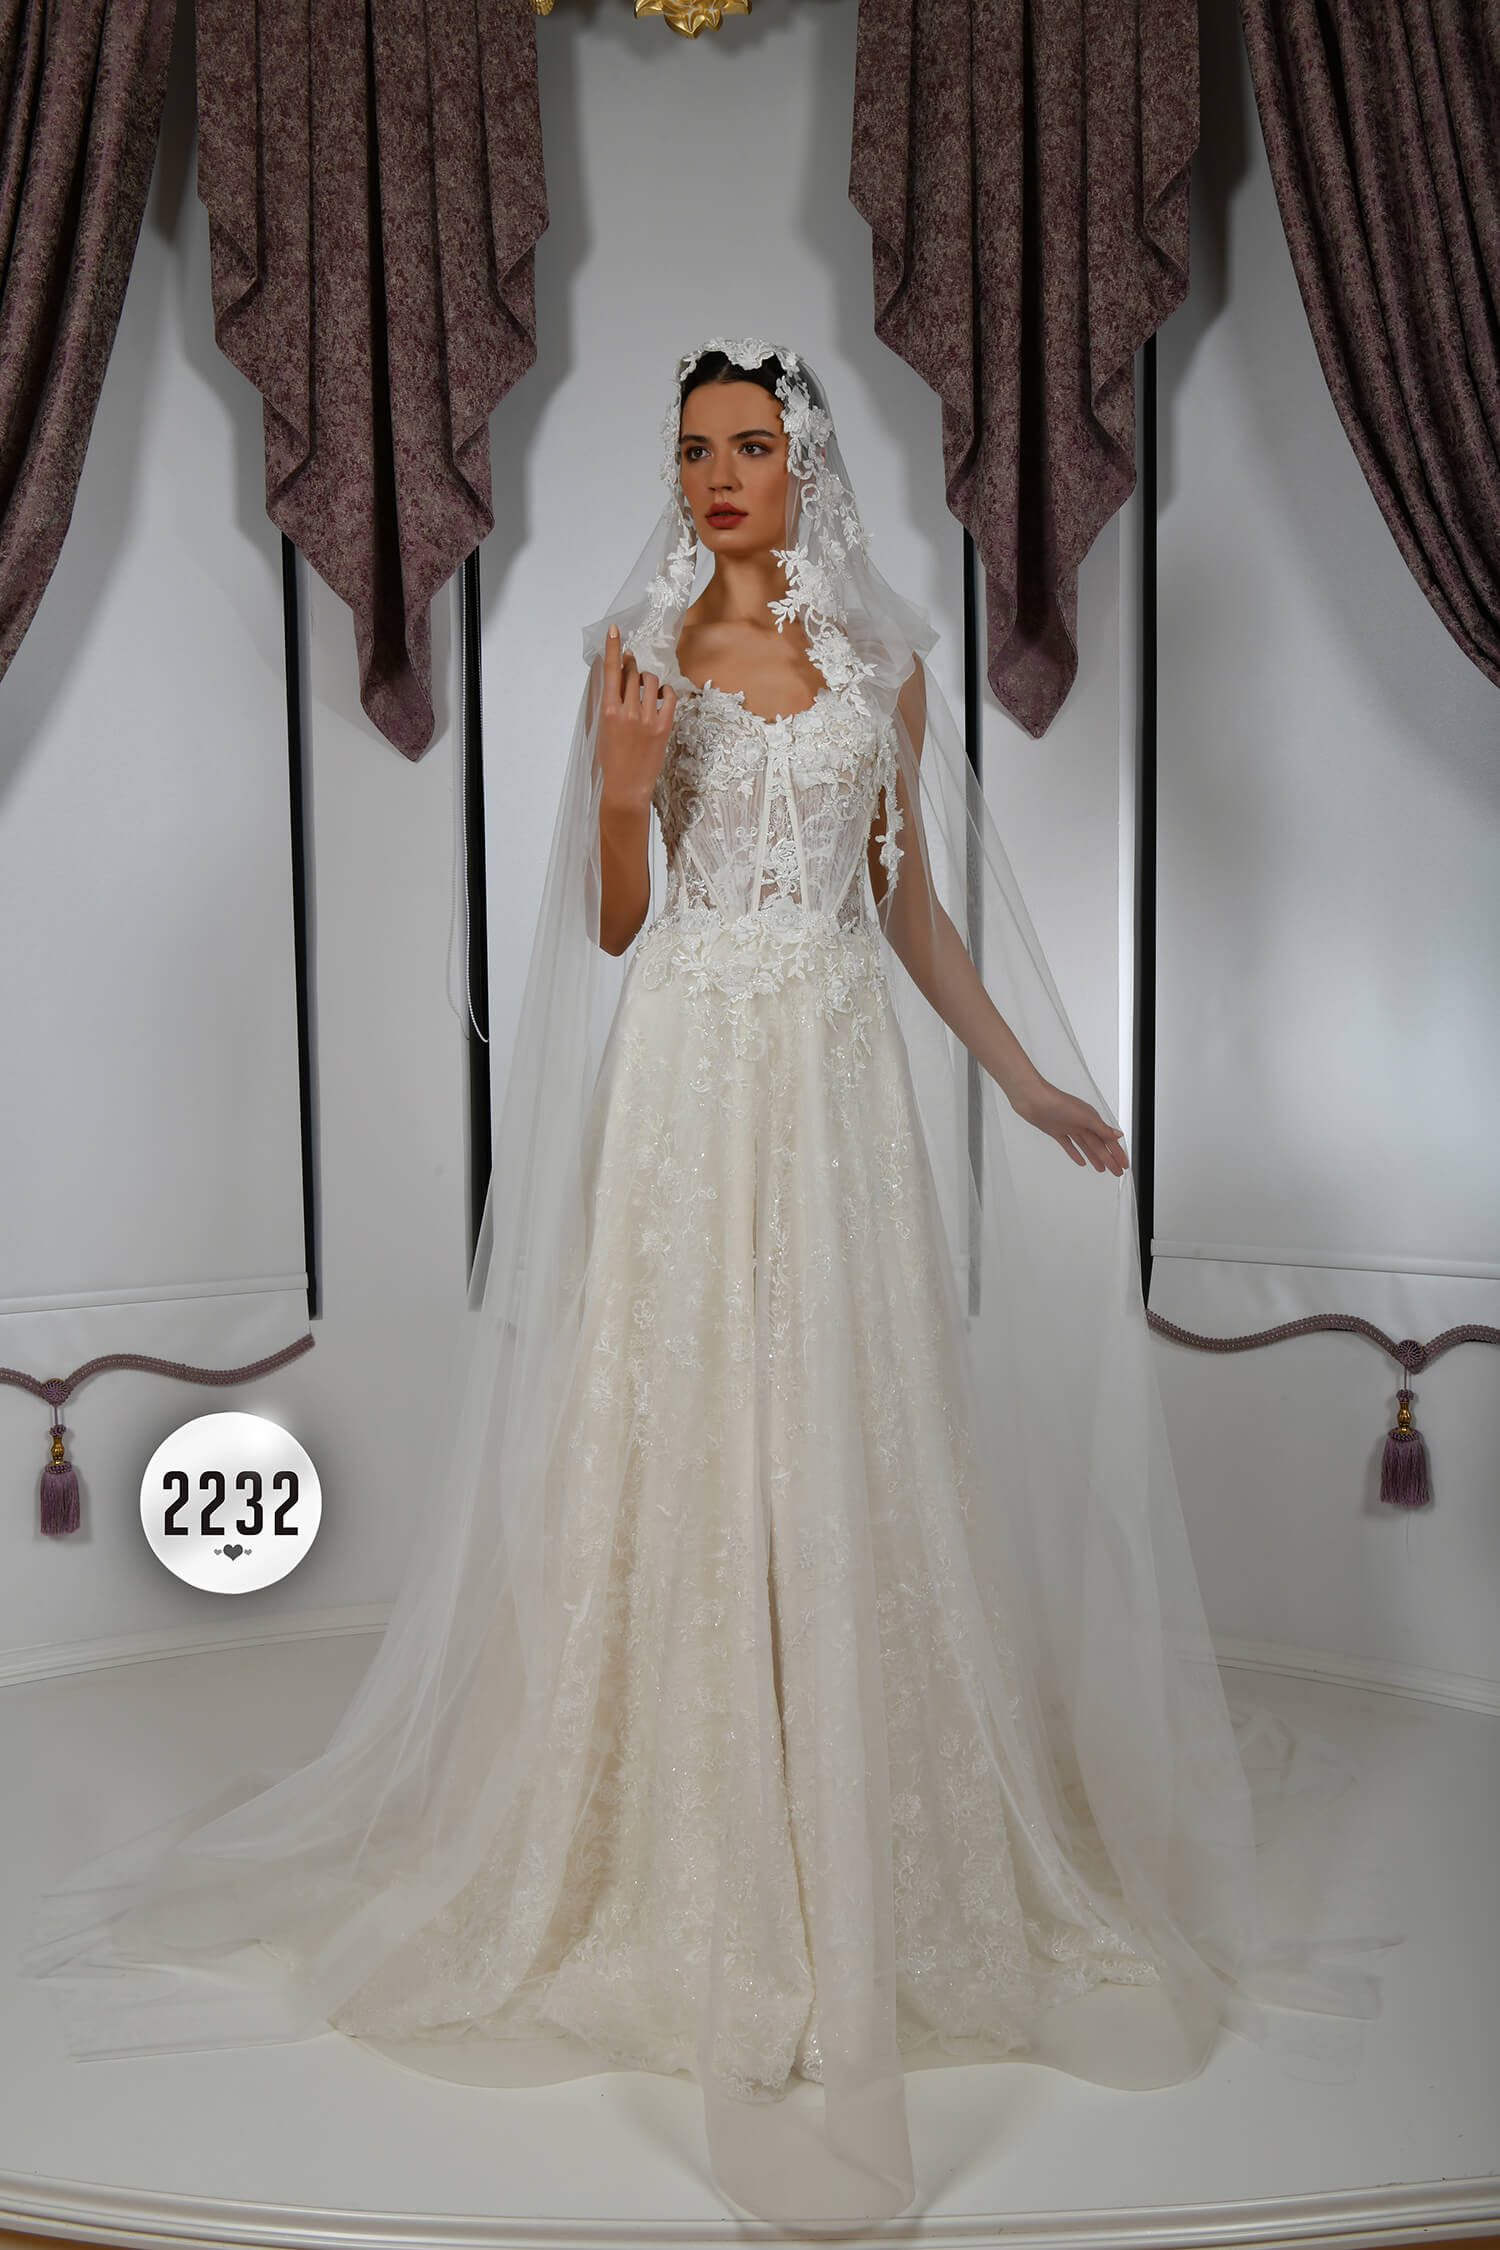 Appliqued Floral Patterned Helen Wedding Dress with Cape Detailed and Hat